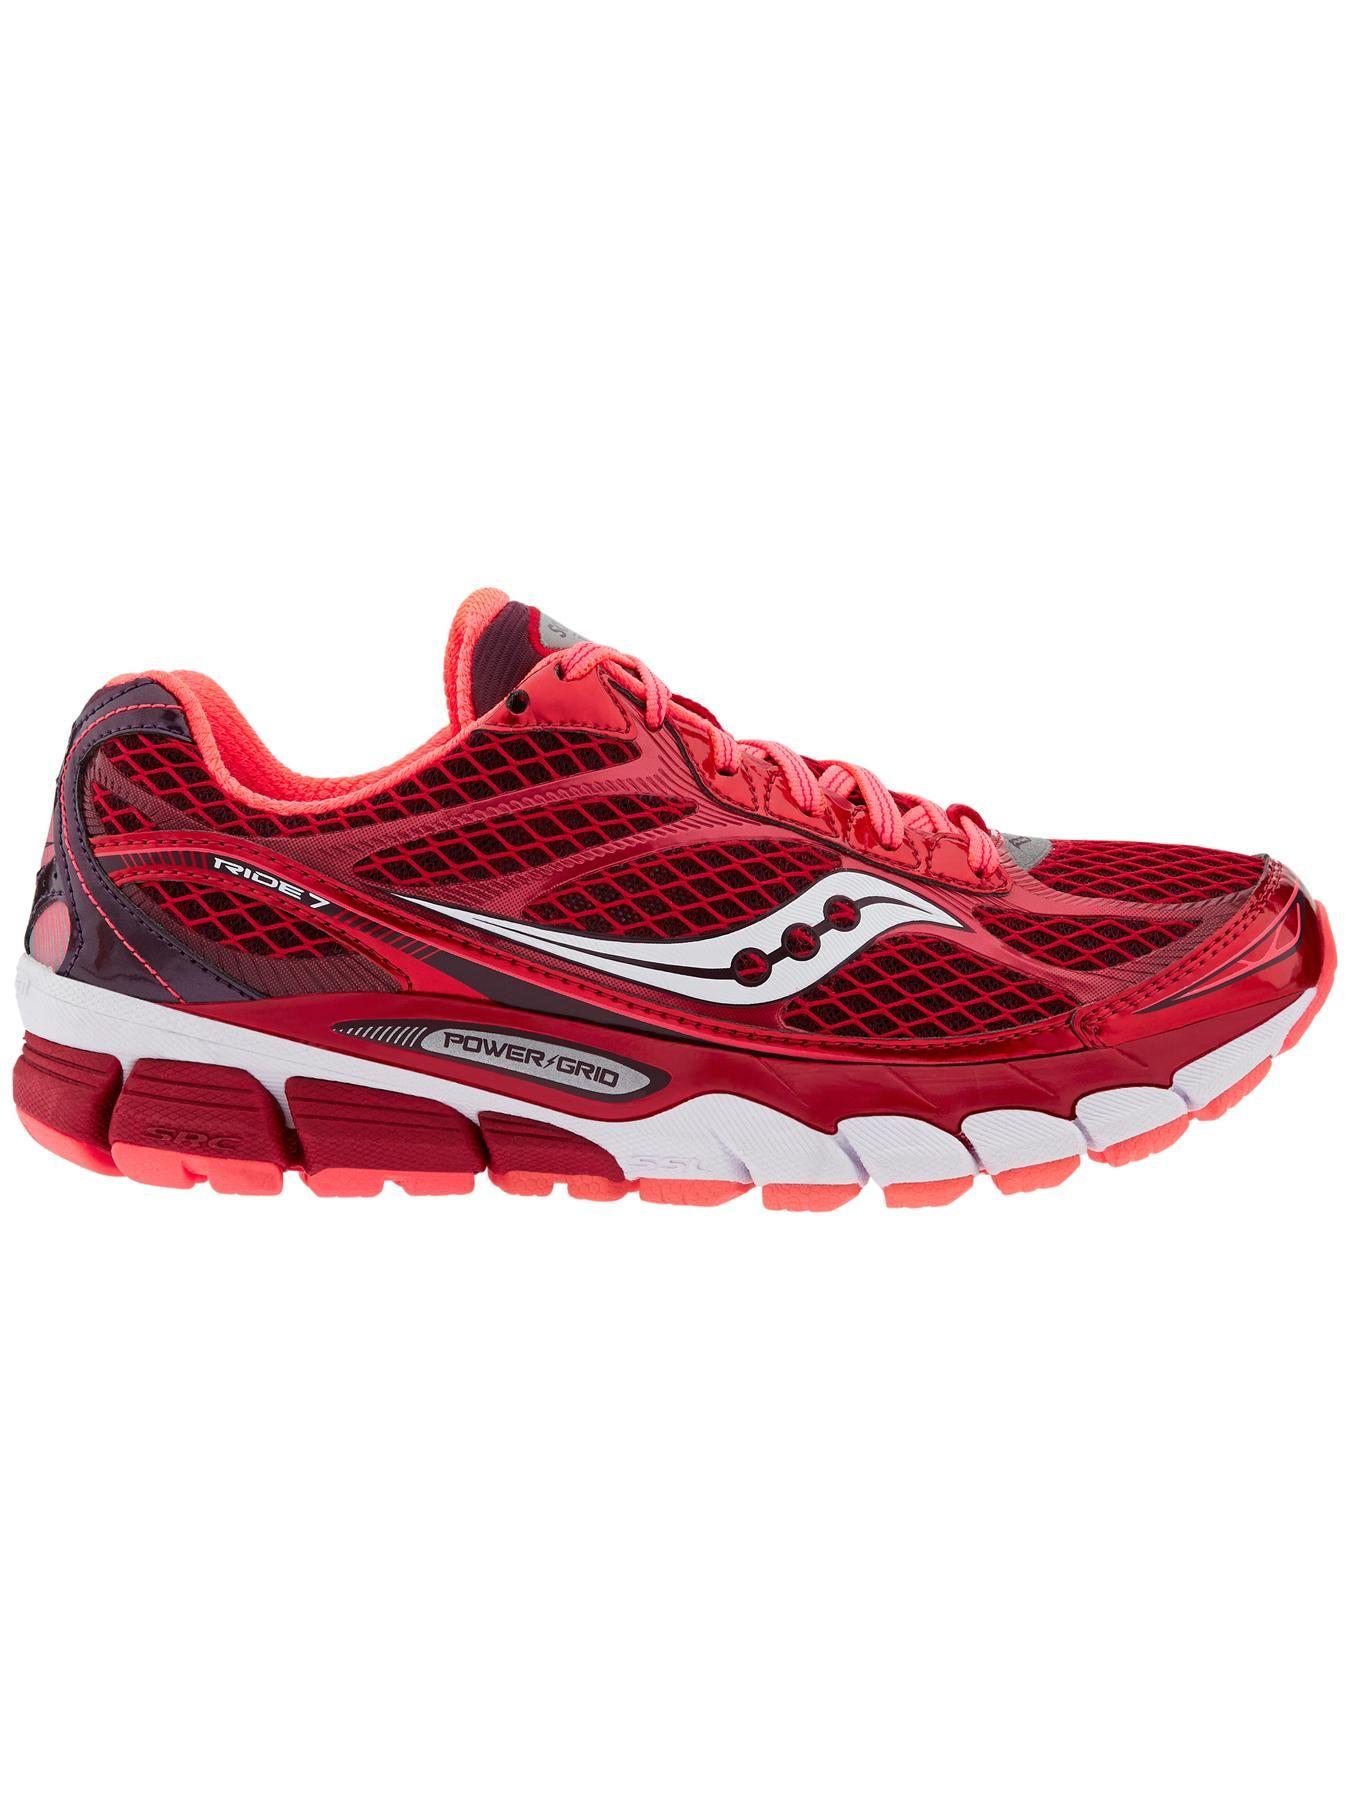 Athleta Ride 7 Run Shoe By Saucony in Red | Lyst